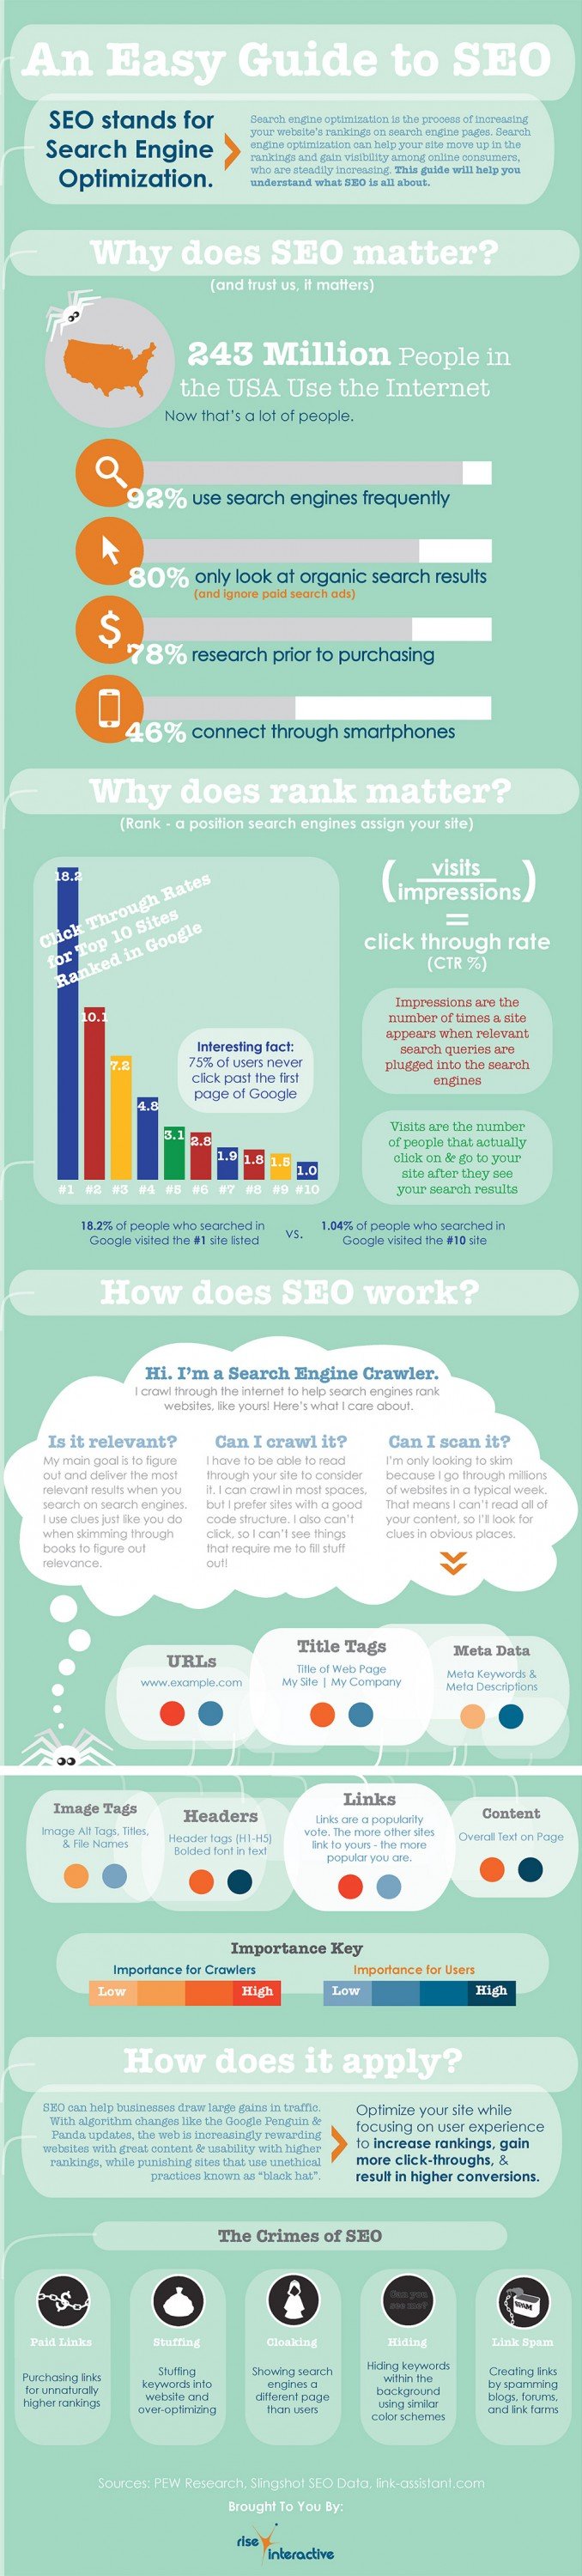 seo guide infographic